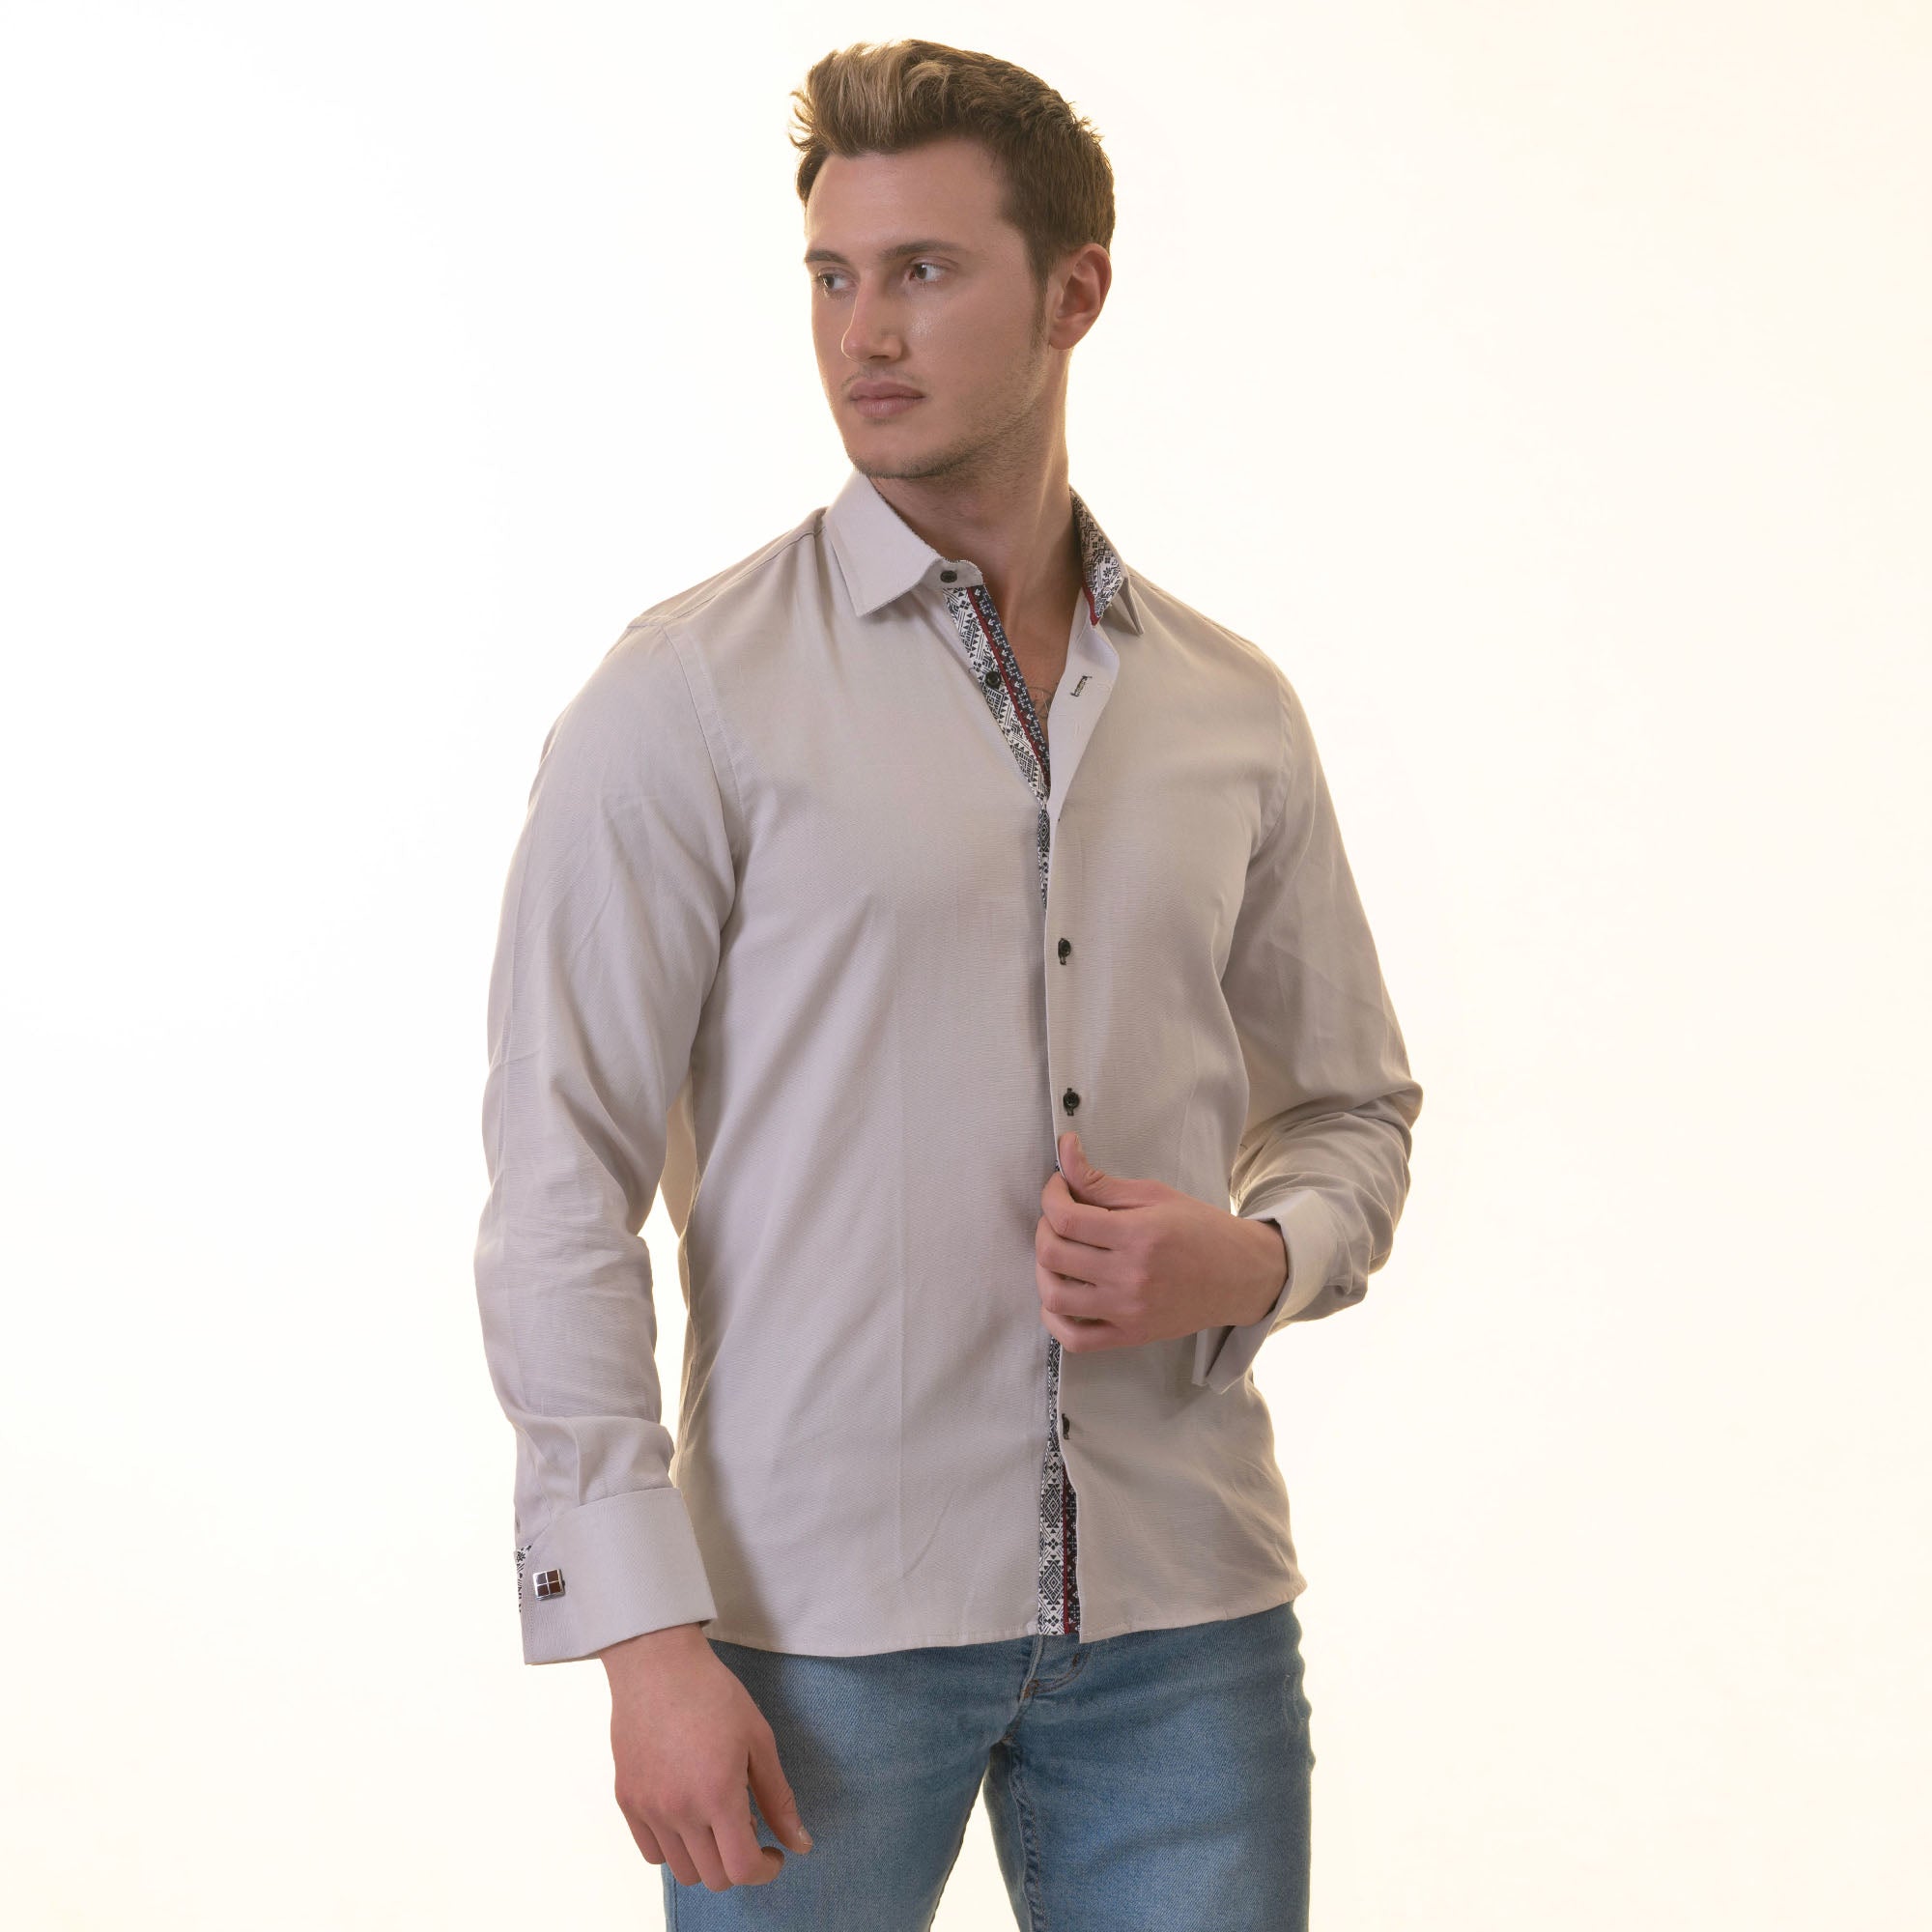 Gray with inside White Ptrined Double Cuff Shirt Mens Slim Fit Designer French Cuff Shirt - tailored Cotton Shirts for Work and Casual Wear